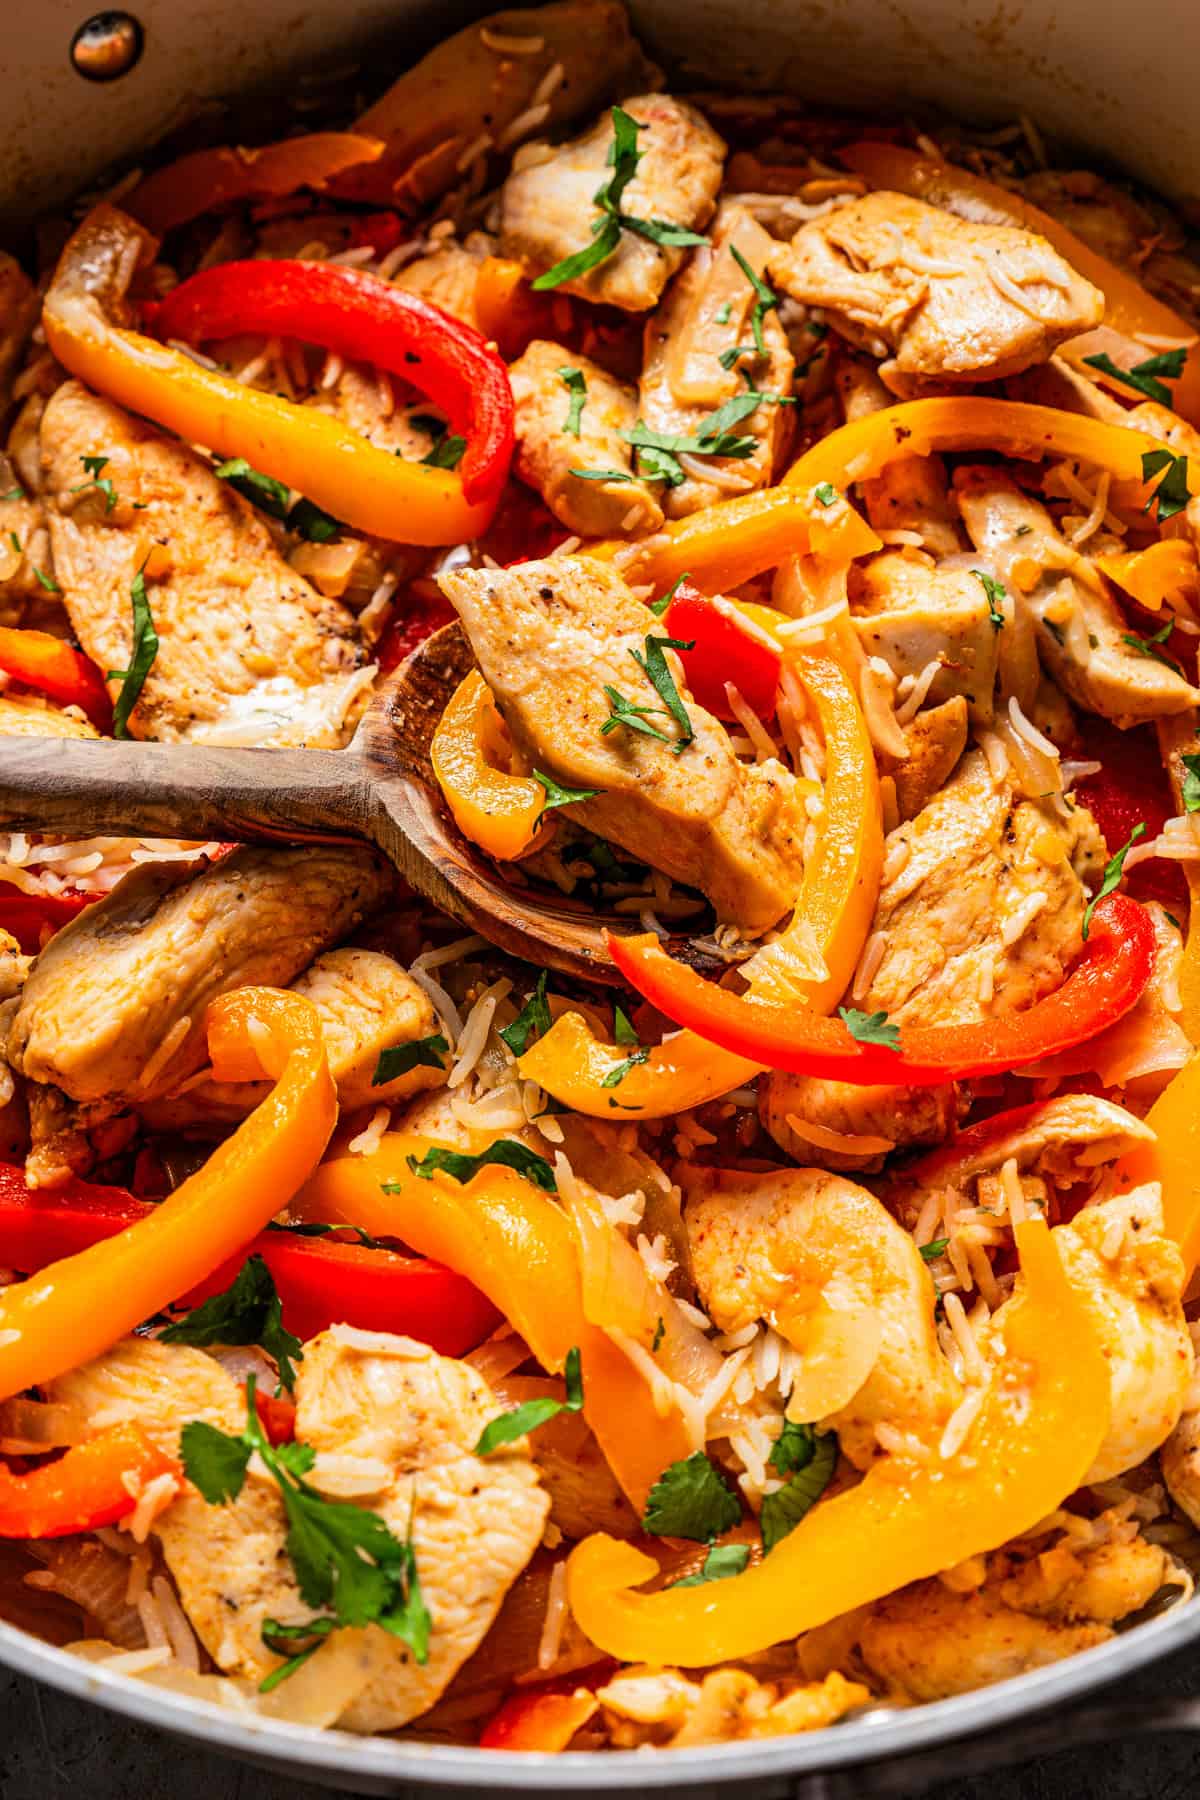 Stirring through sliced bell peppers and cooked chicken in a skillet.